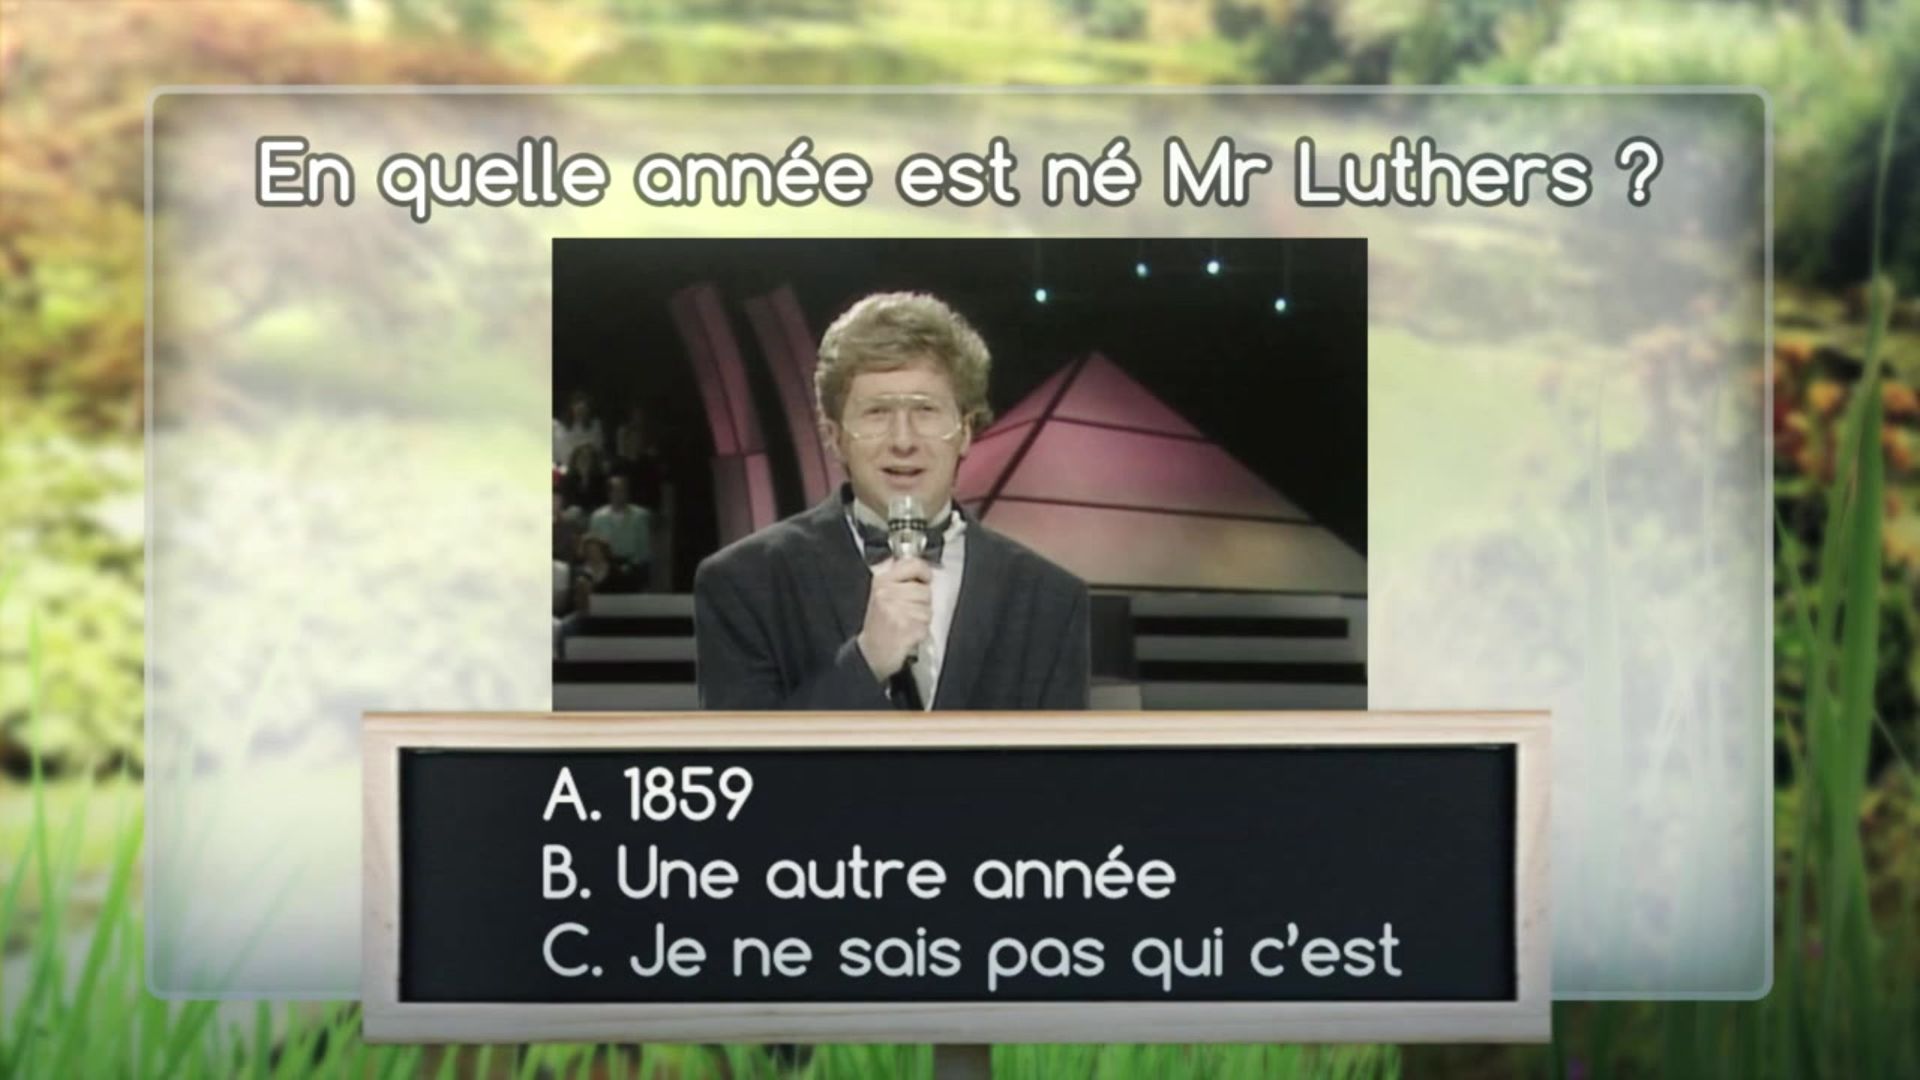 "Luthers et Loisirs", Martin Charlier rend hommage à Thierry Luthers dans sa nouvelle parodie